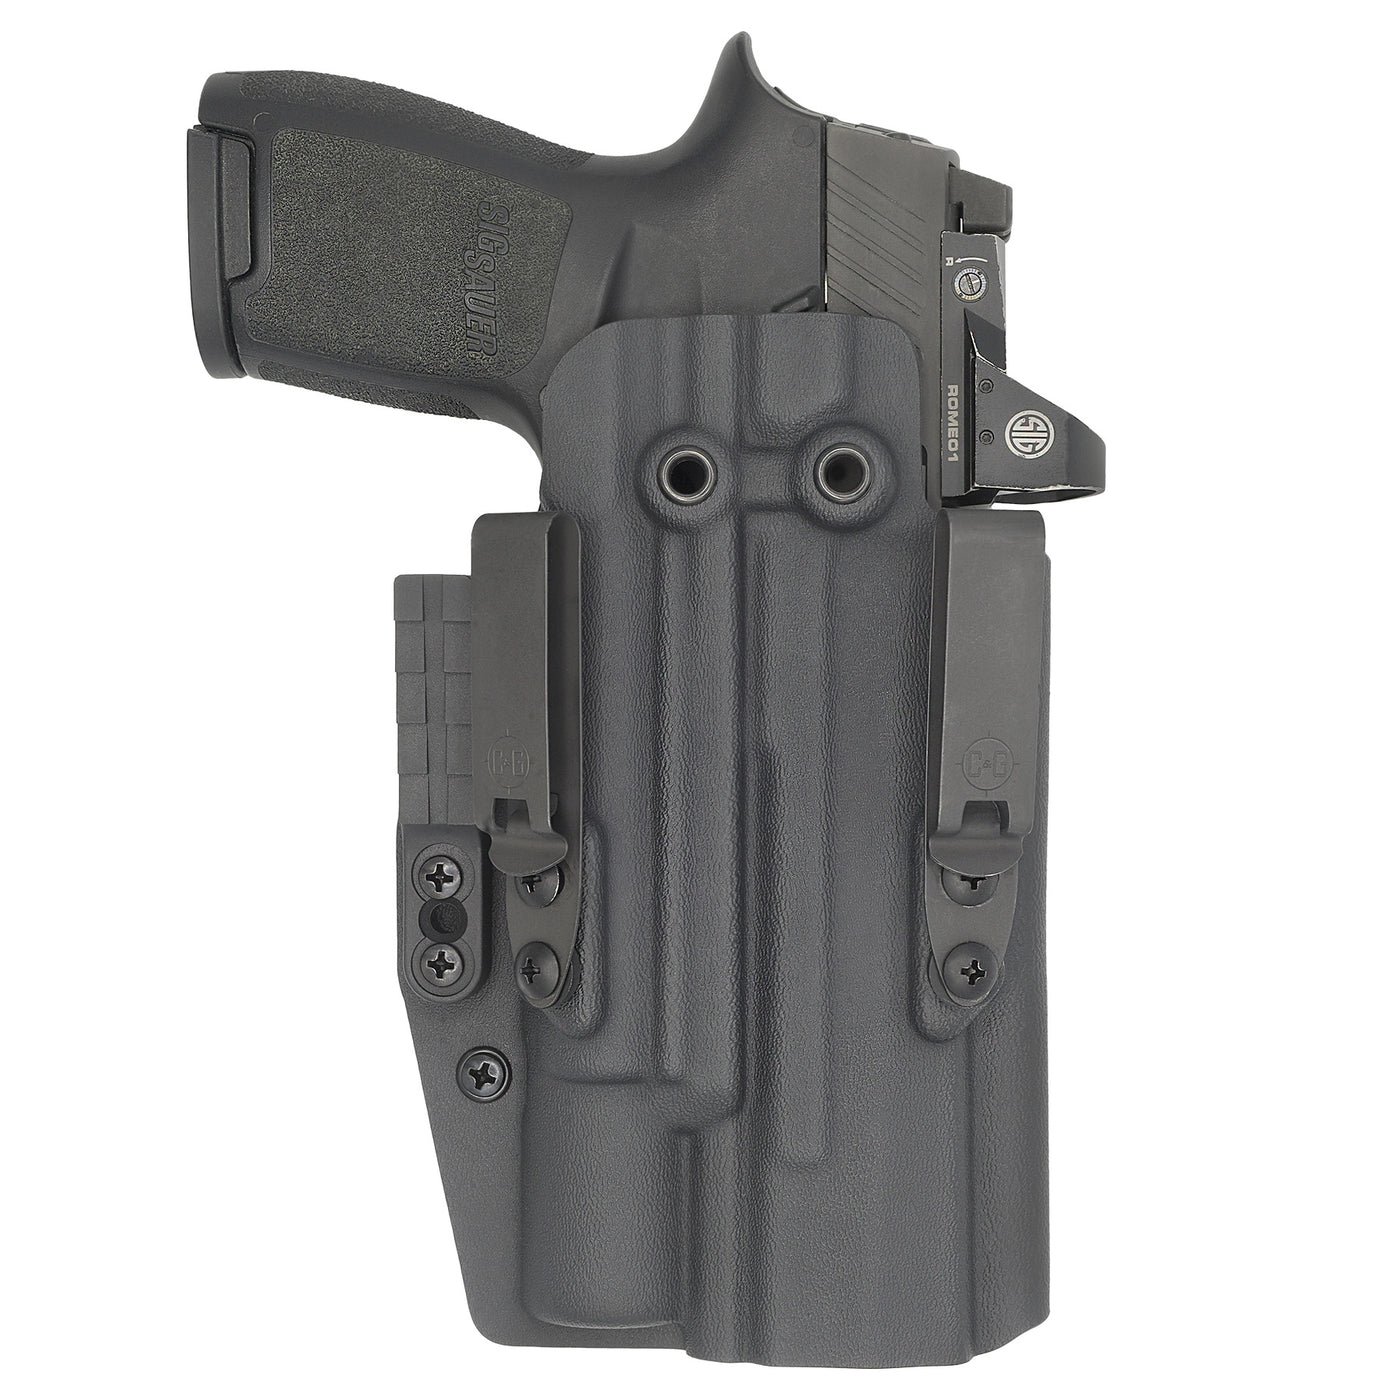 C&G holsters Quickship IWB ALPHA UPGRADE Tactical Masada Surefire X300 in holstered position